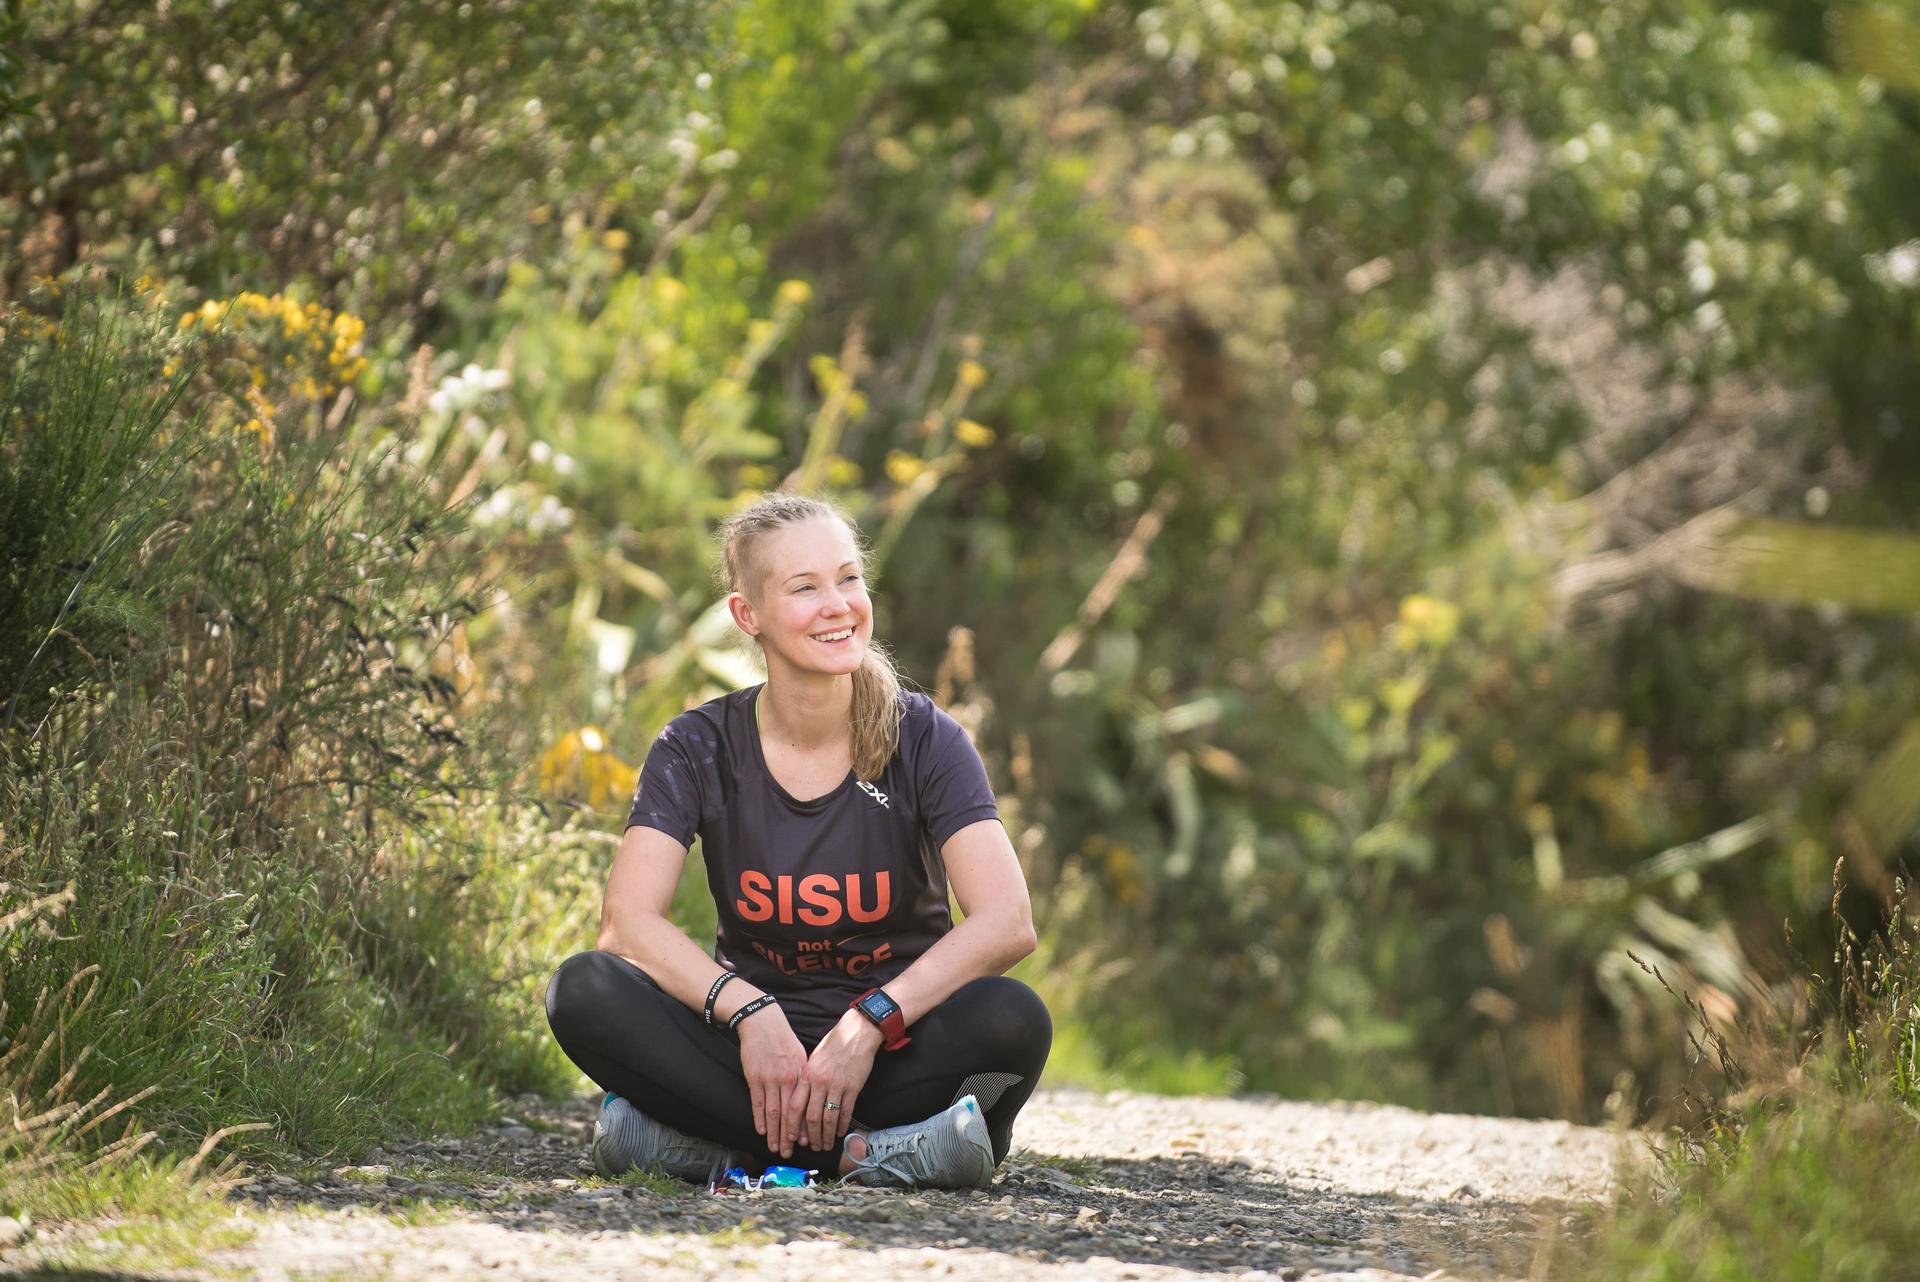 A white woman sits near lots of greenery smiling and wearing black clothes with the word sisu in red letters on her shirt.